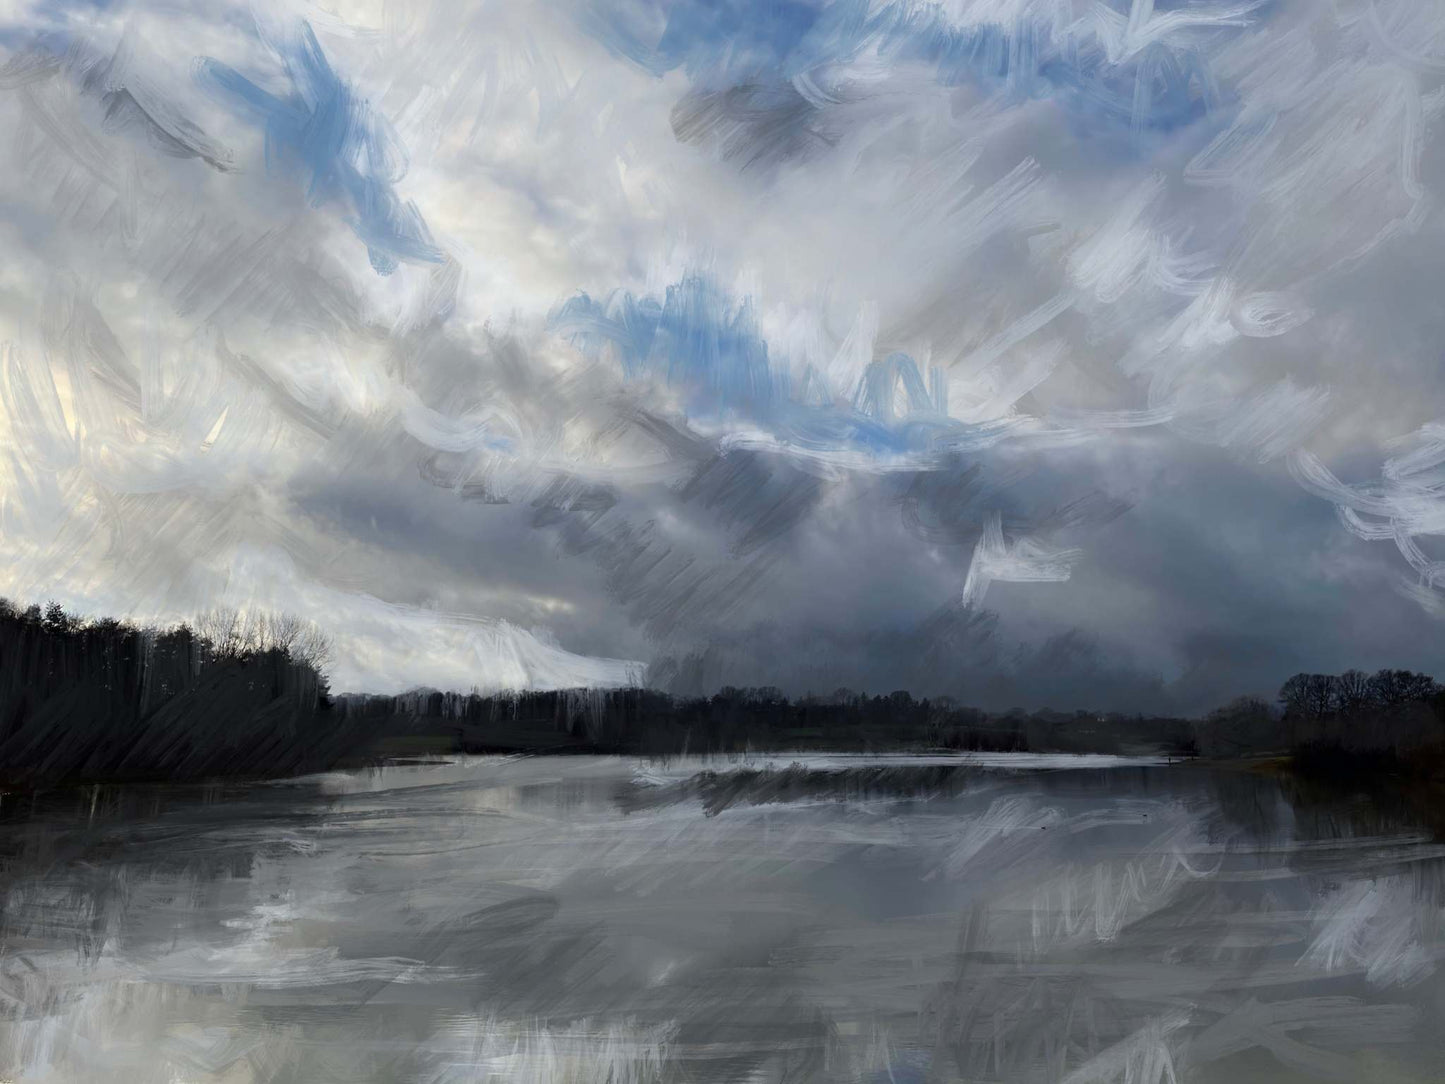 Reservoir on a Blustery Day | Blustery Day | Wall Art Studios UK